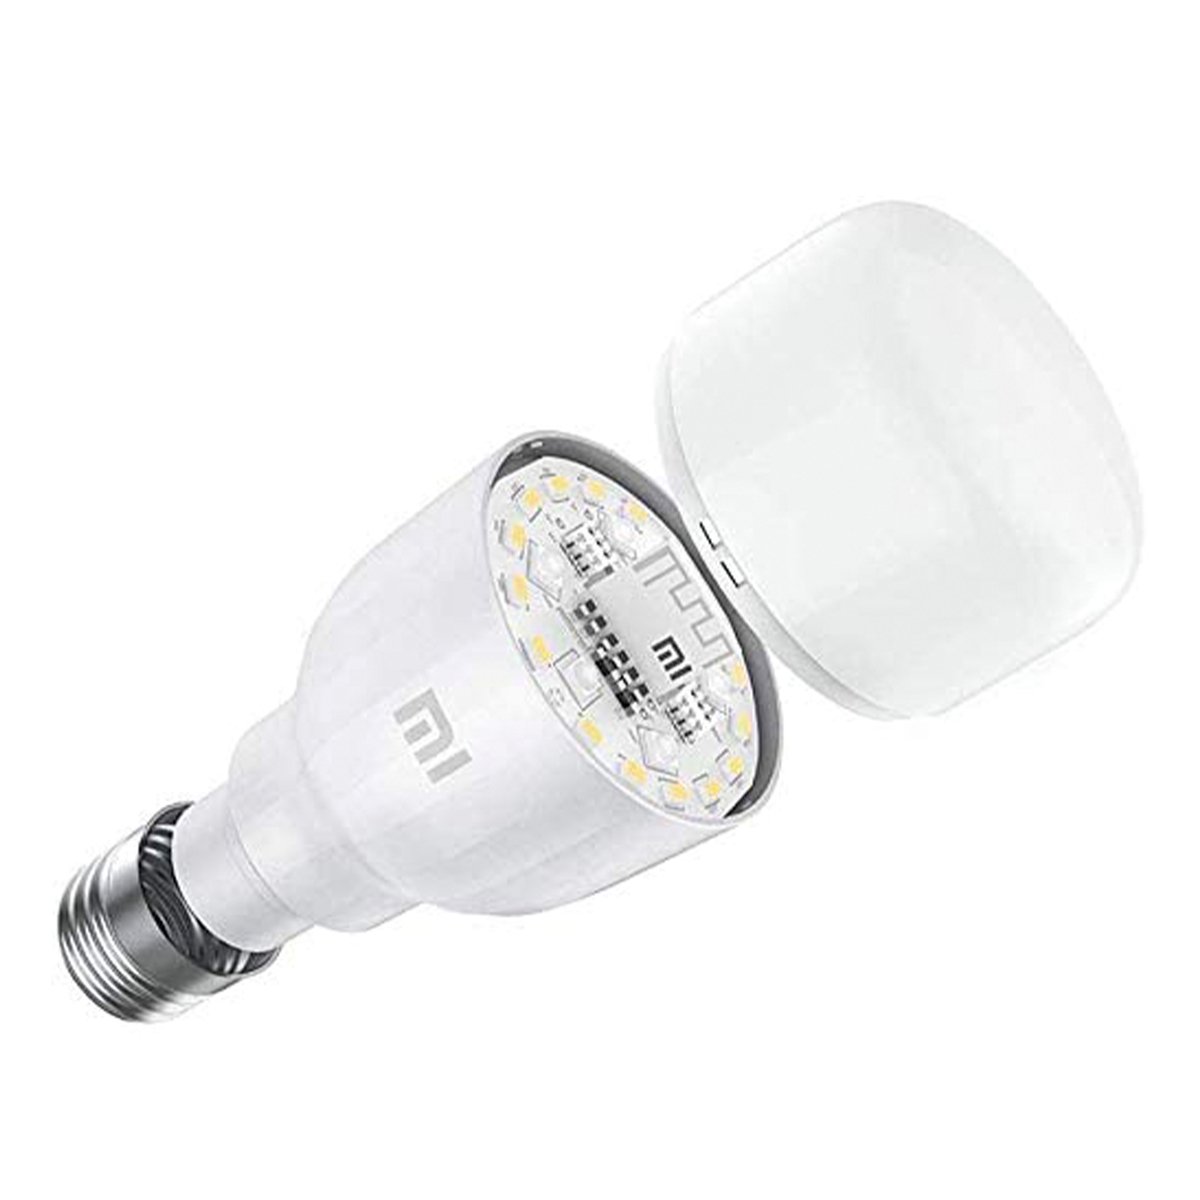 Mi Smart LED Bulb Essential(White and Color) MJDPL01YL